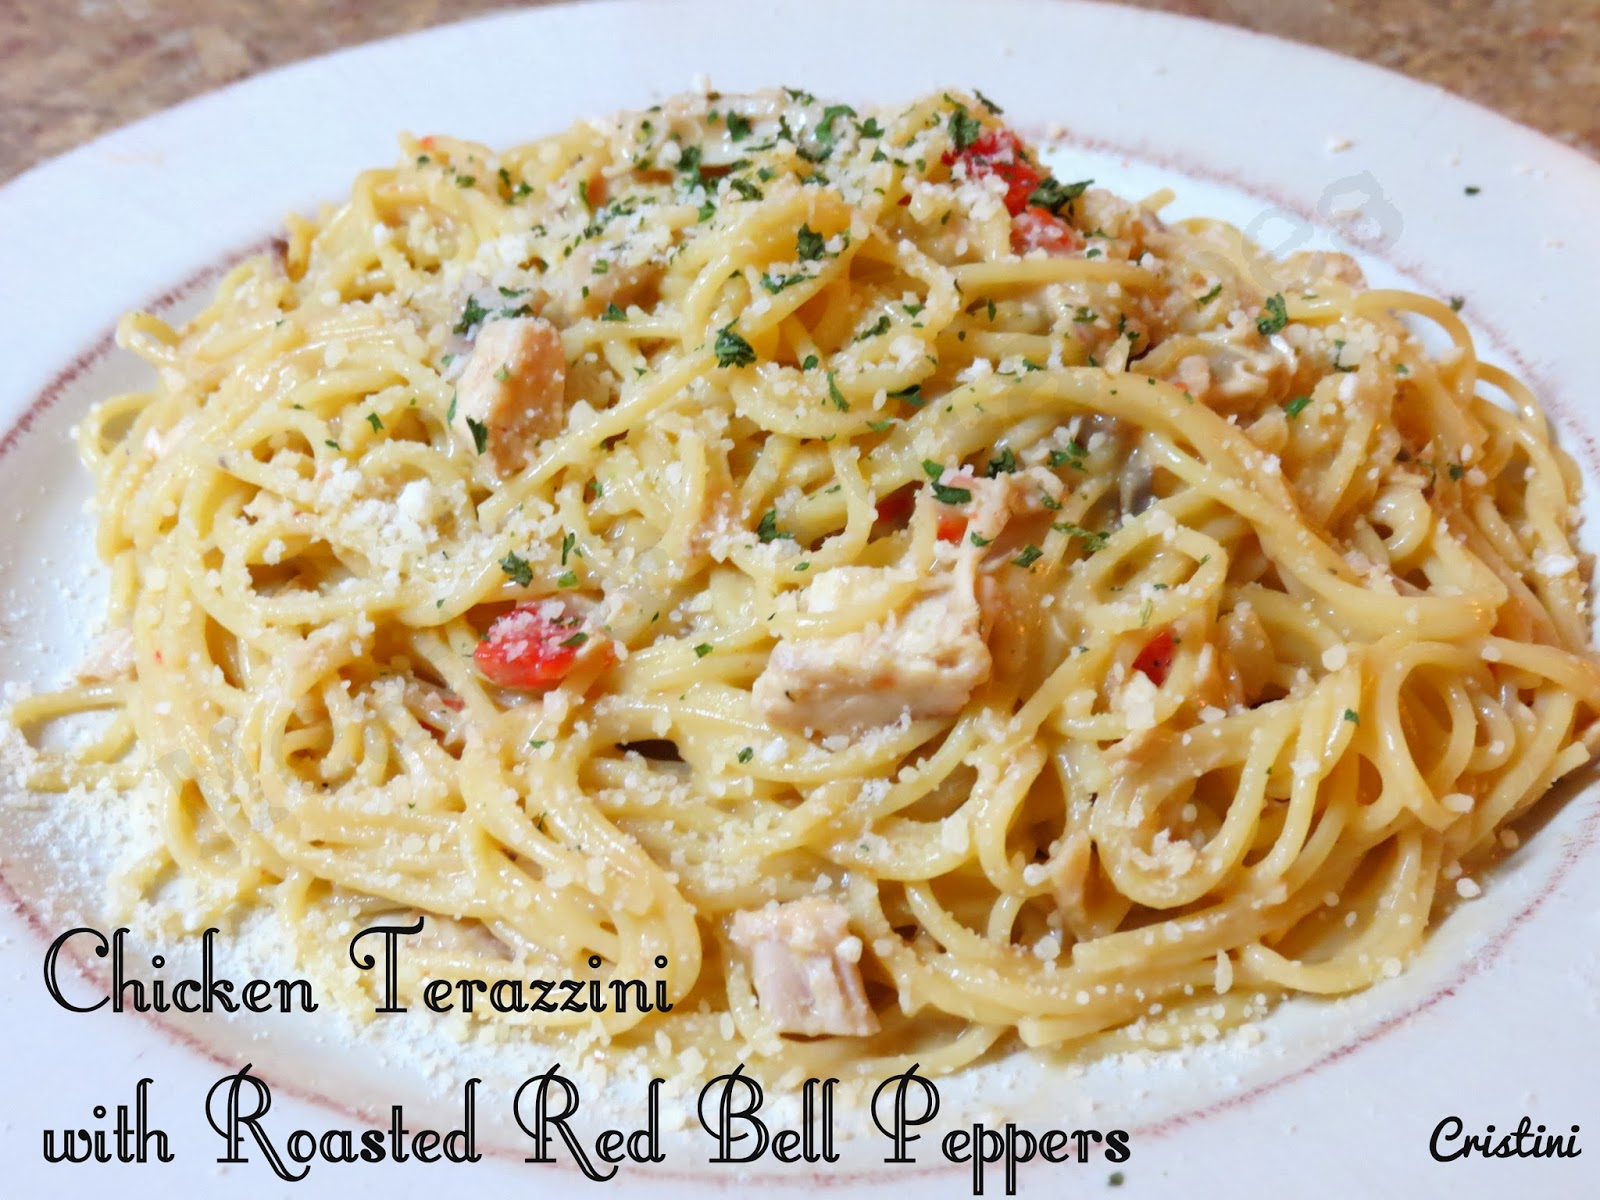 Meat & Potatoes, Recipes and More!: Chicken Tetrazzini with Roasted Red ...